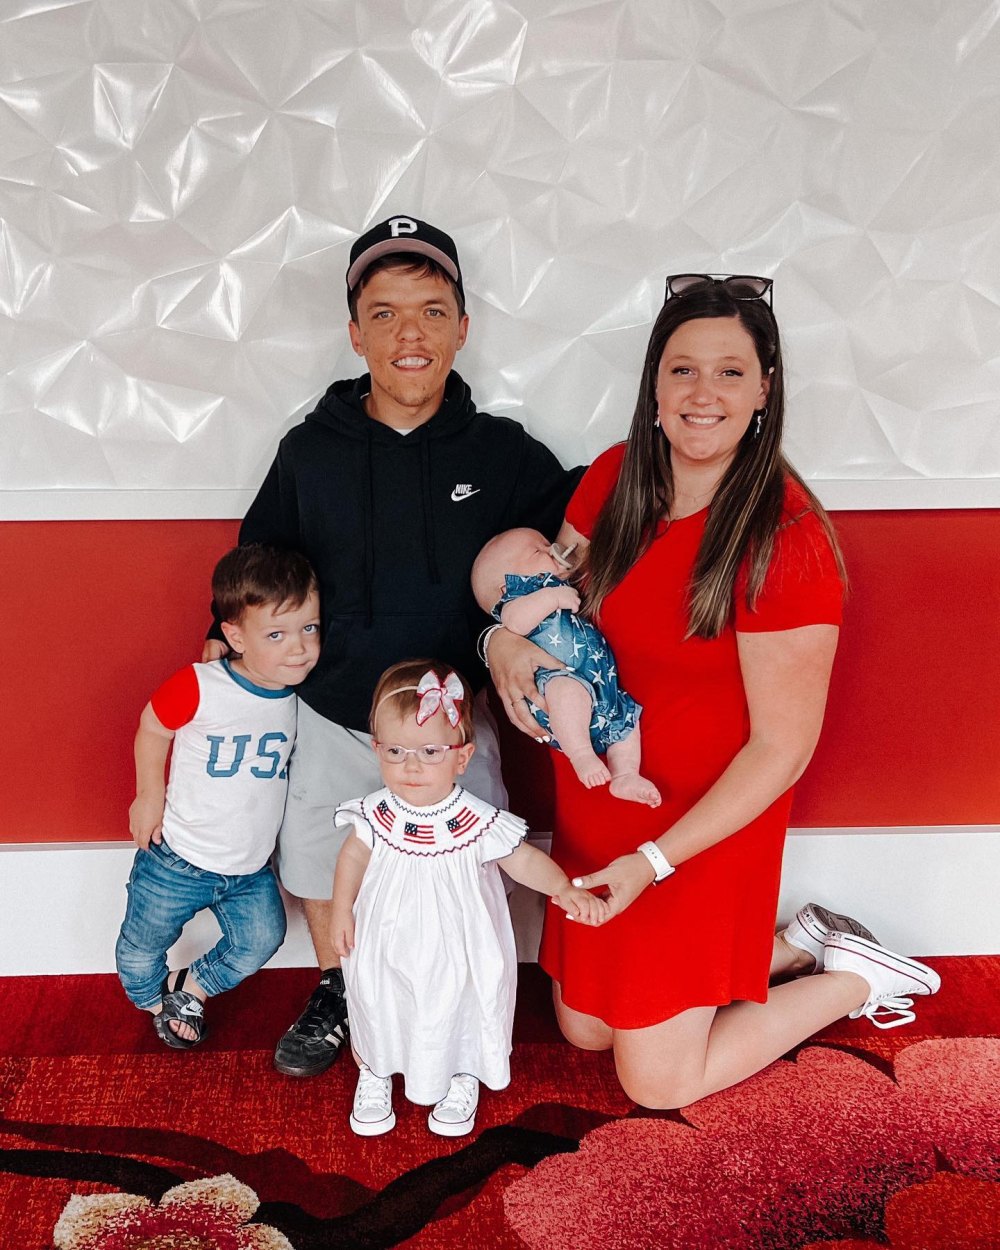 Tori Roloff Celebrates Son Jackson, 5, Being One of a Kind He's Starting to Notice His Differences